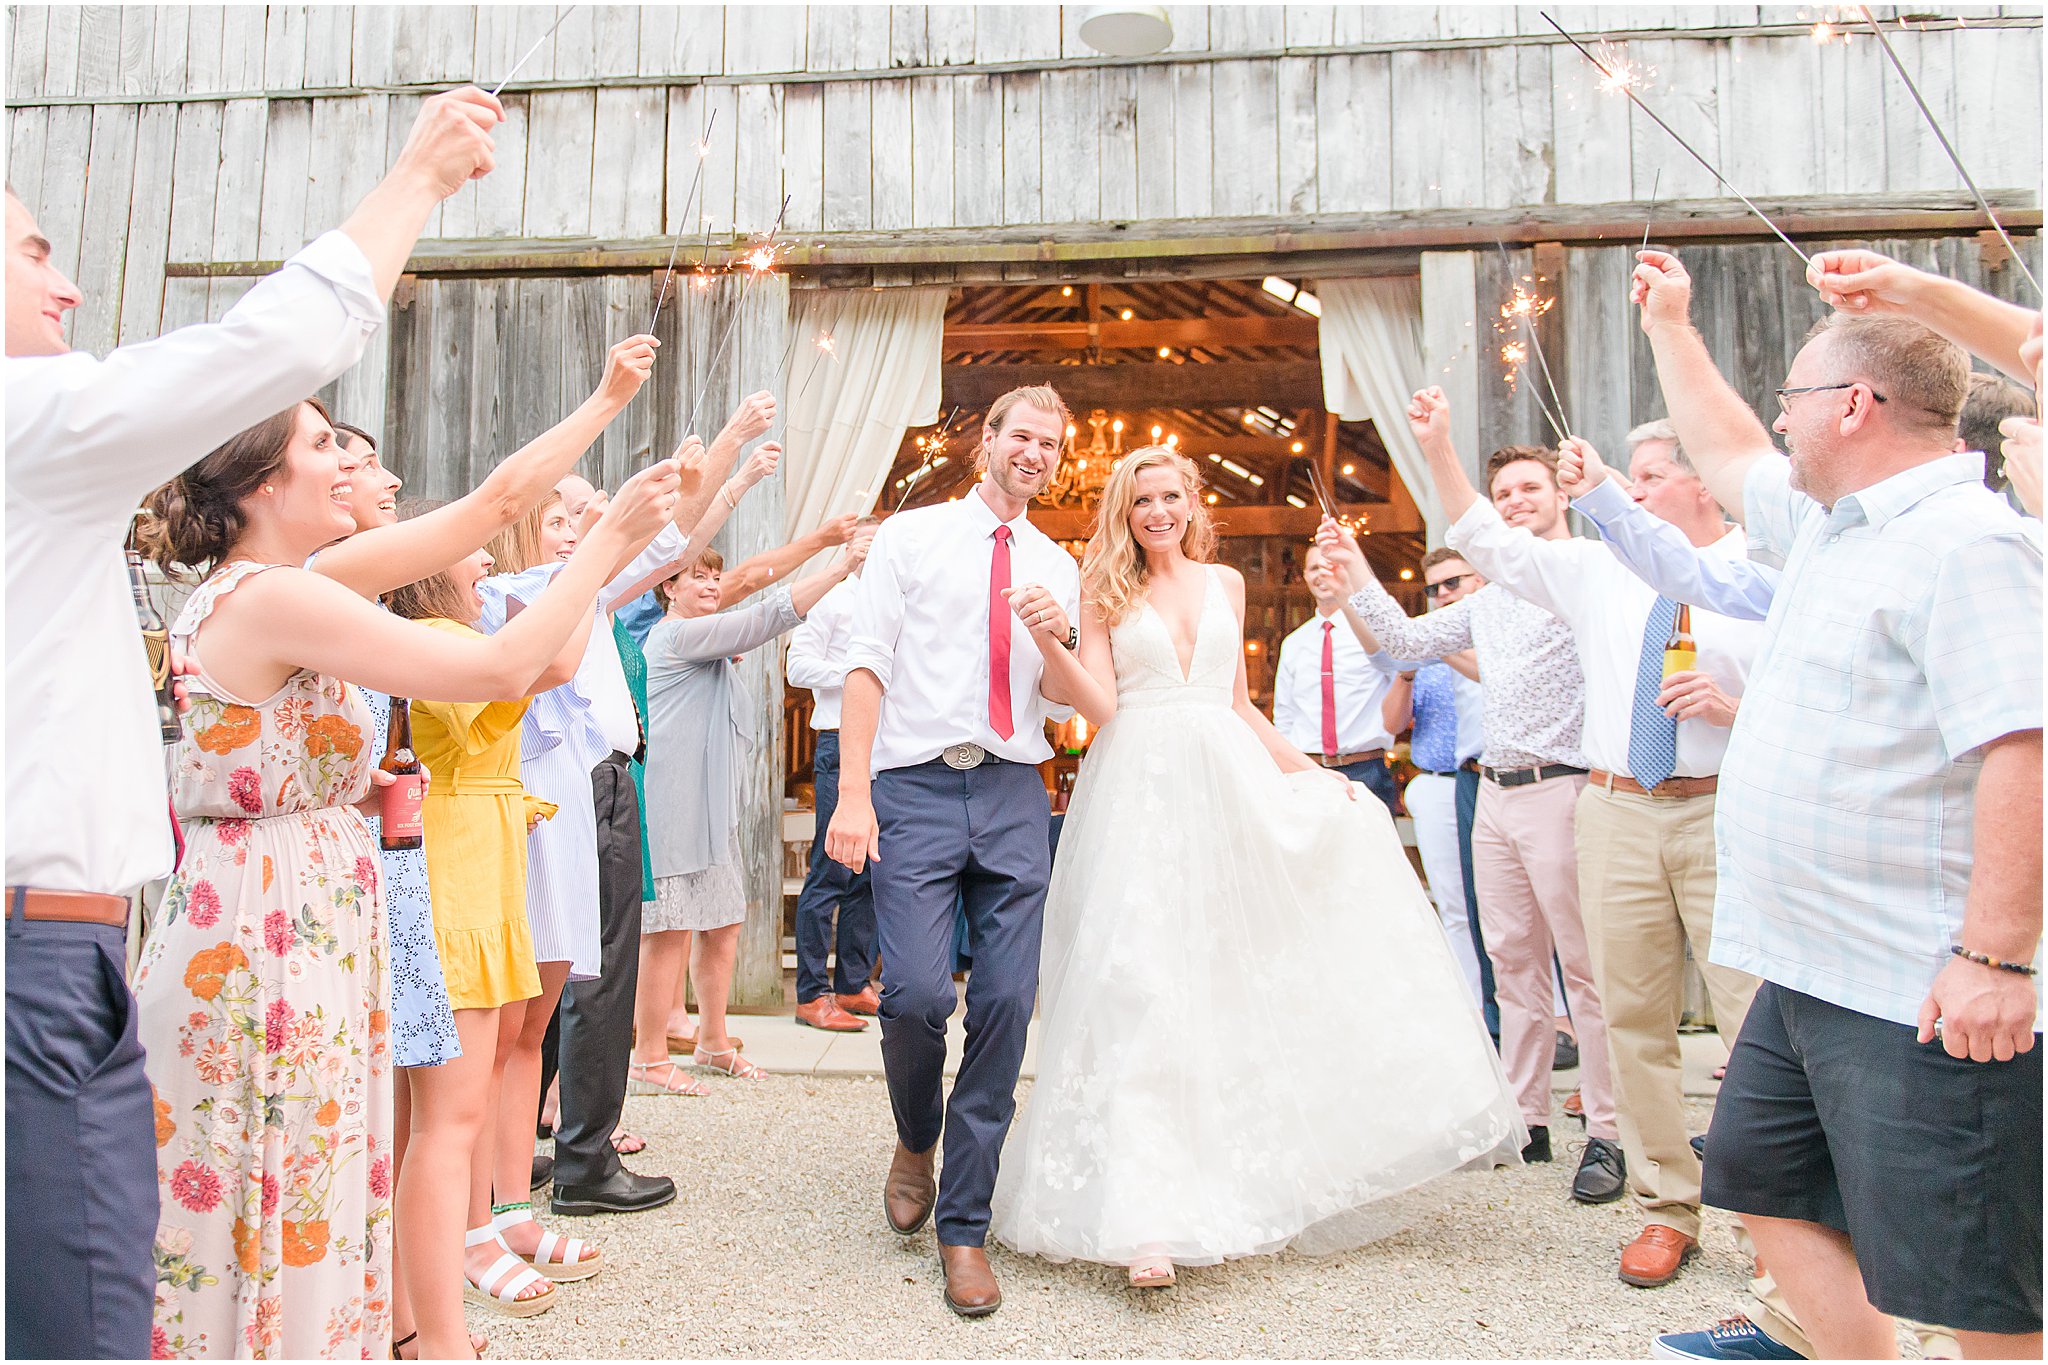 Sparkler Exit The Old Barn At Brown County wedding